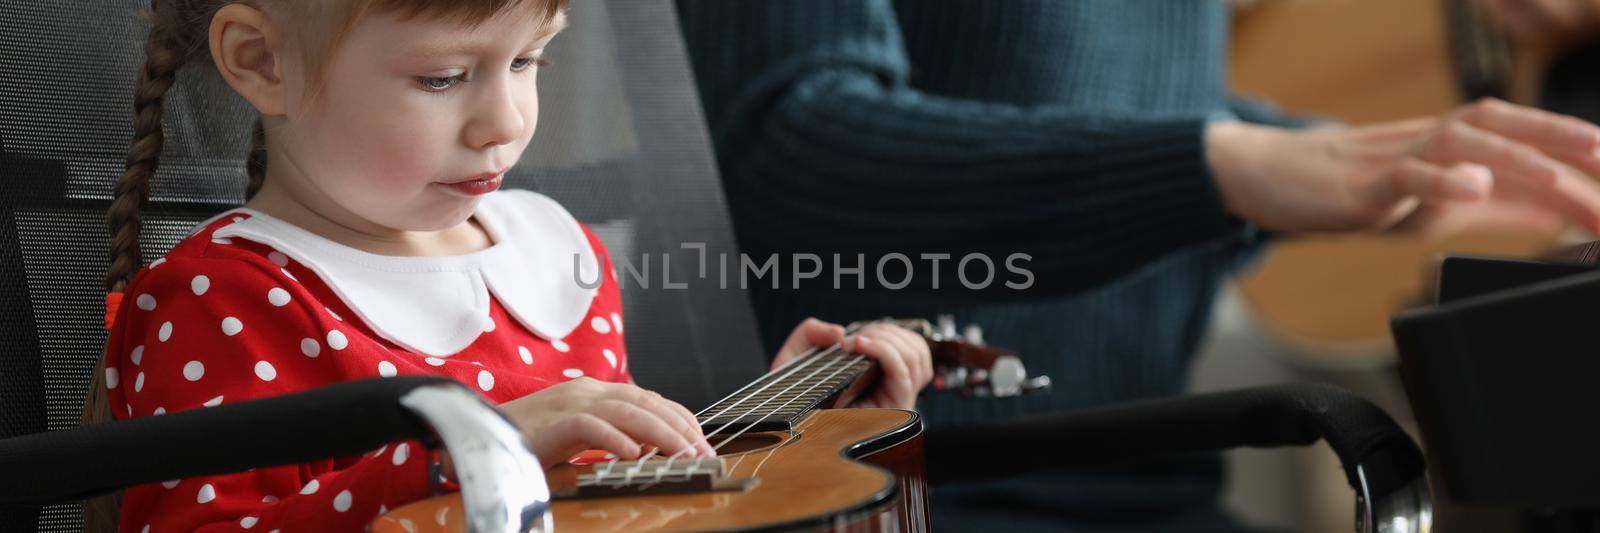 Portrait of bored girl hold guitar and fooling around with musical instrument. Child pull string while teacher play piano. Preschool development concept